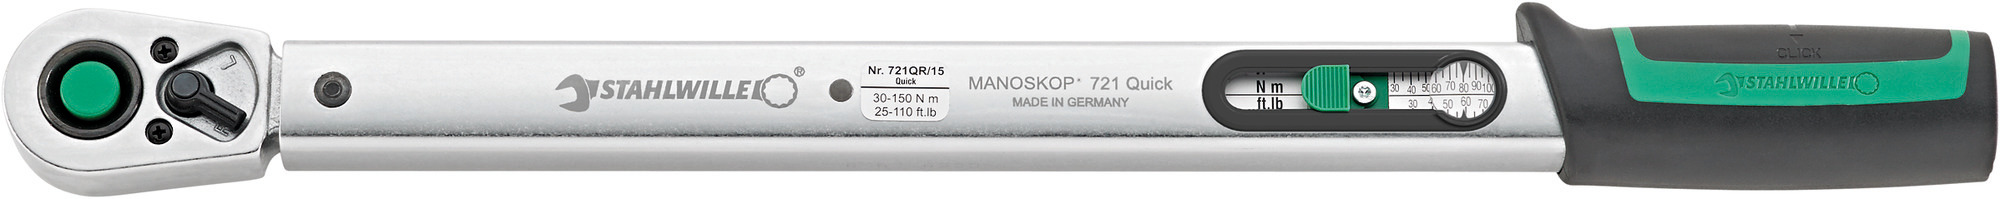 Standard MANOSKOP® Torque Wrenches with Permanently Installed QuickRelease Ratchet 721QR Quick